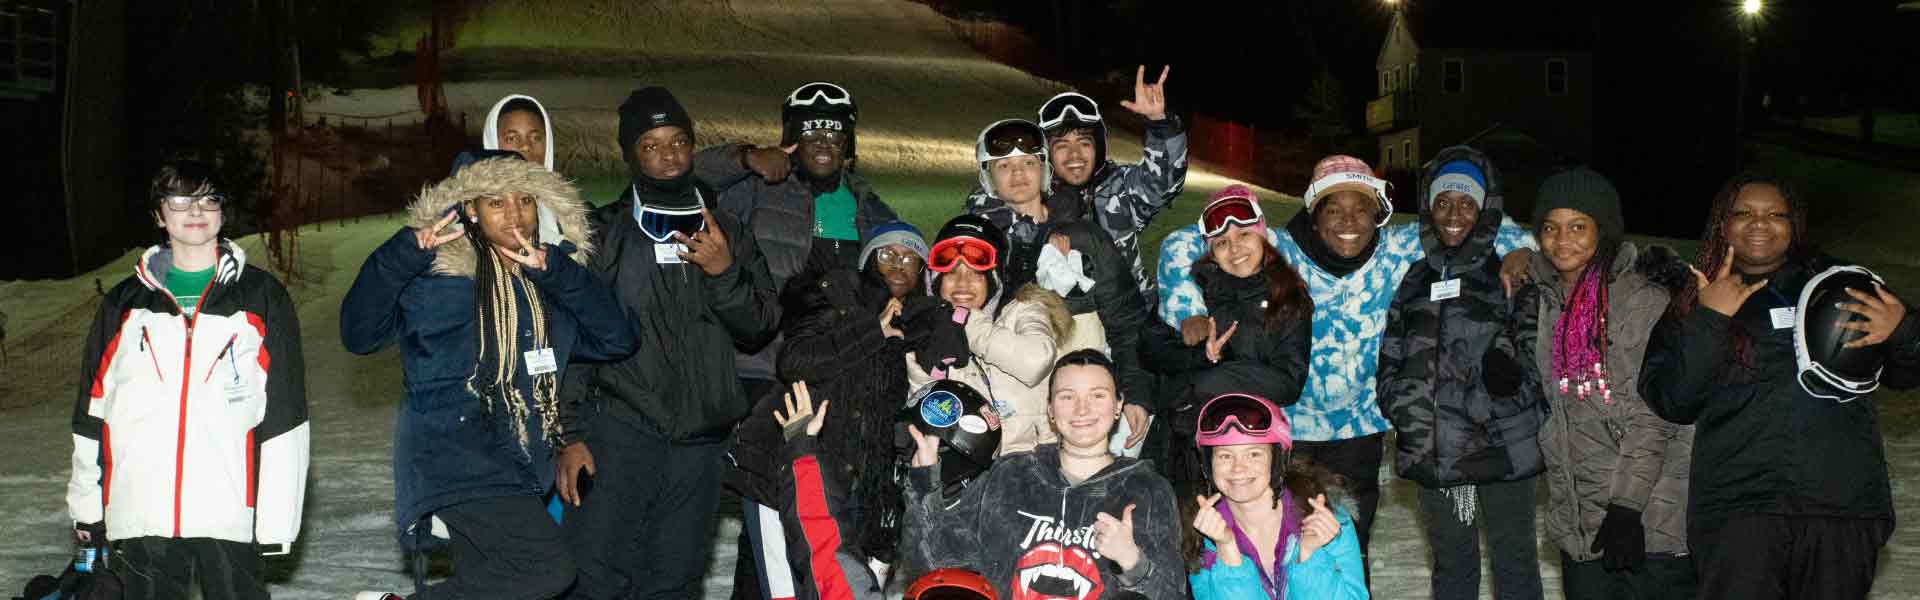 Group of skiers and snowboarders visiting the mountain as a single visit group.